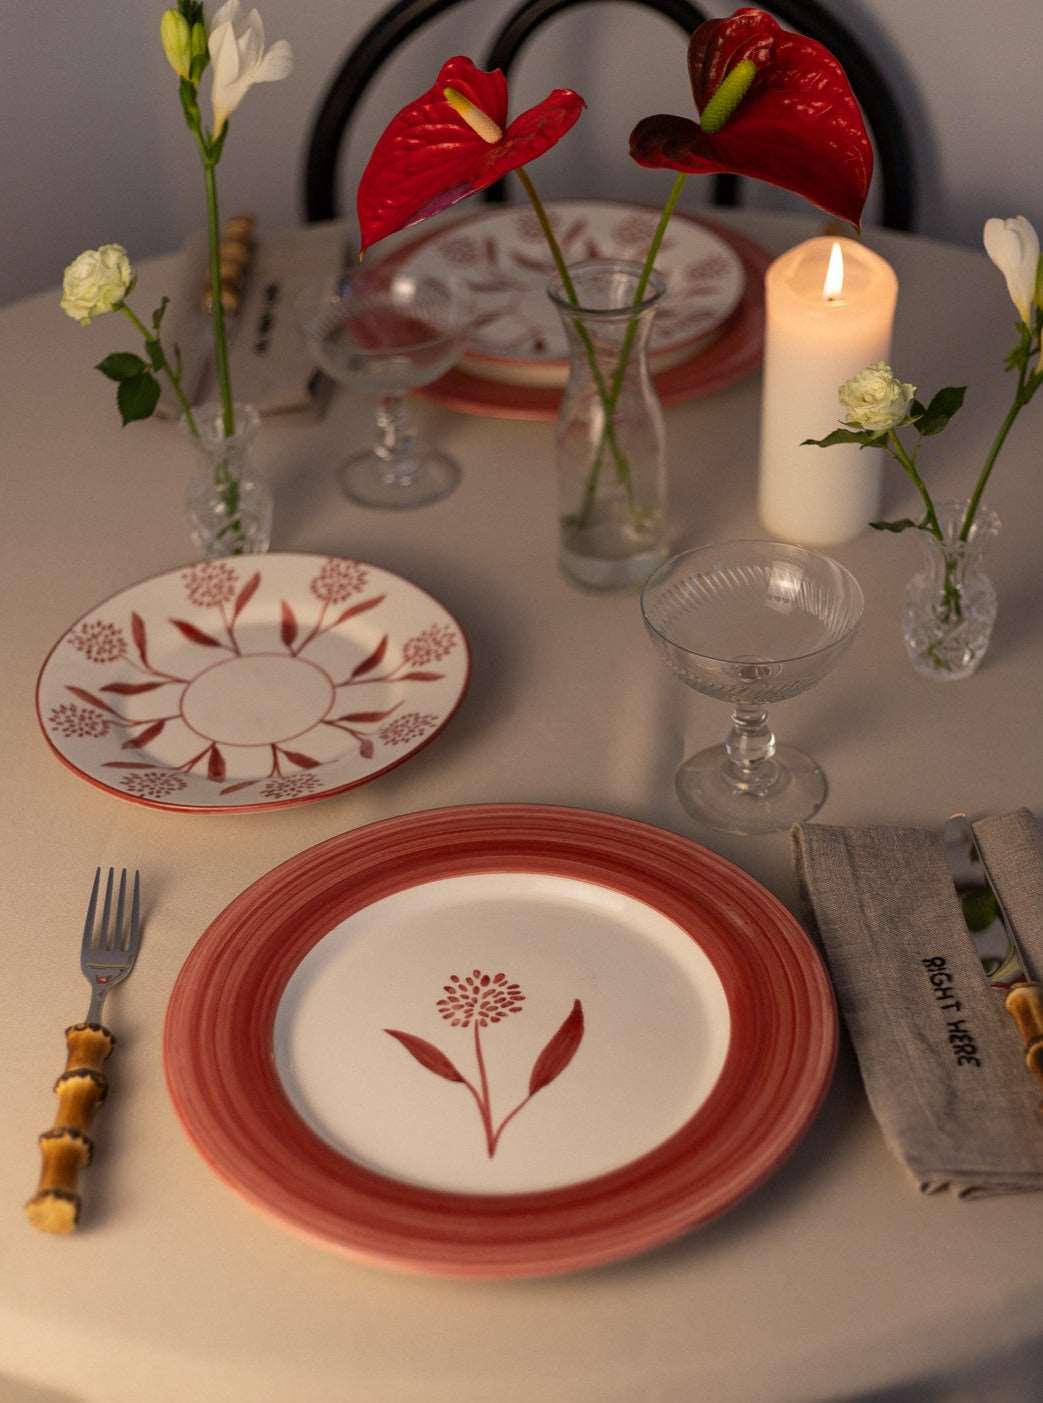 Cora Hand-Painted Ceramic Dessert Plate - Red and White - Matching with Cecilia Dinner Plate and Bamboo Cutlery